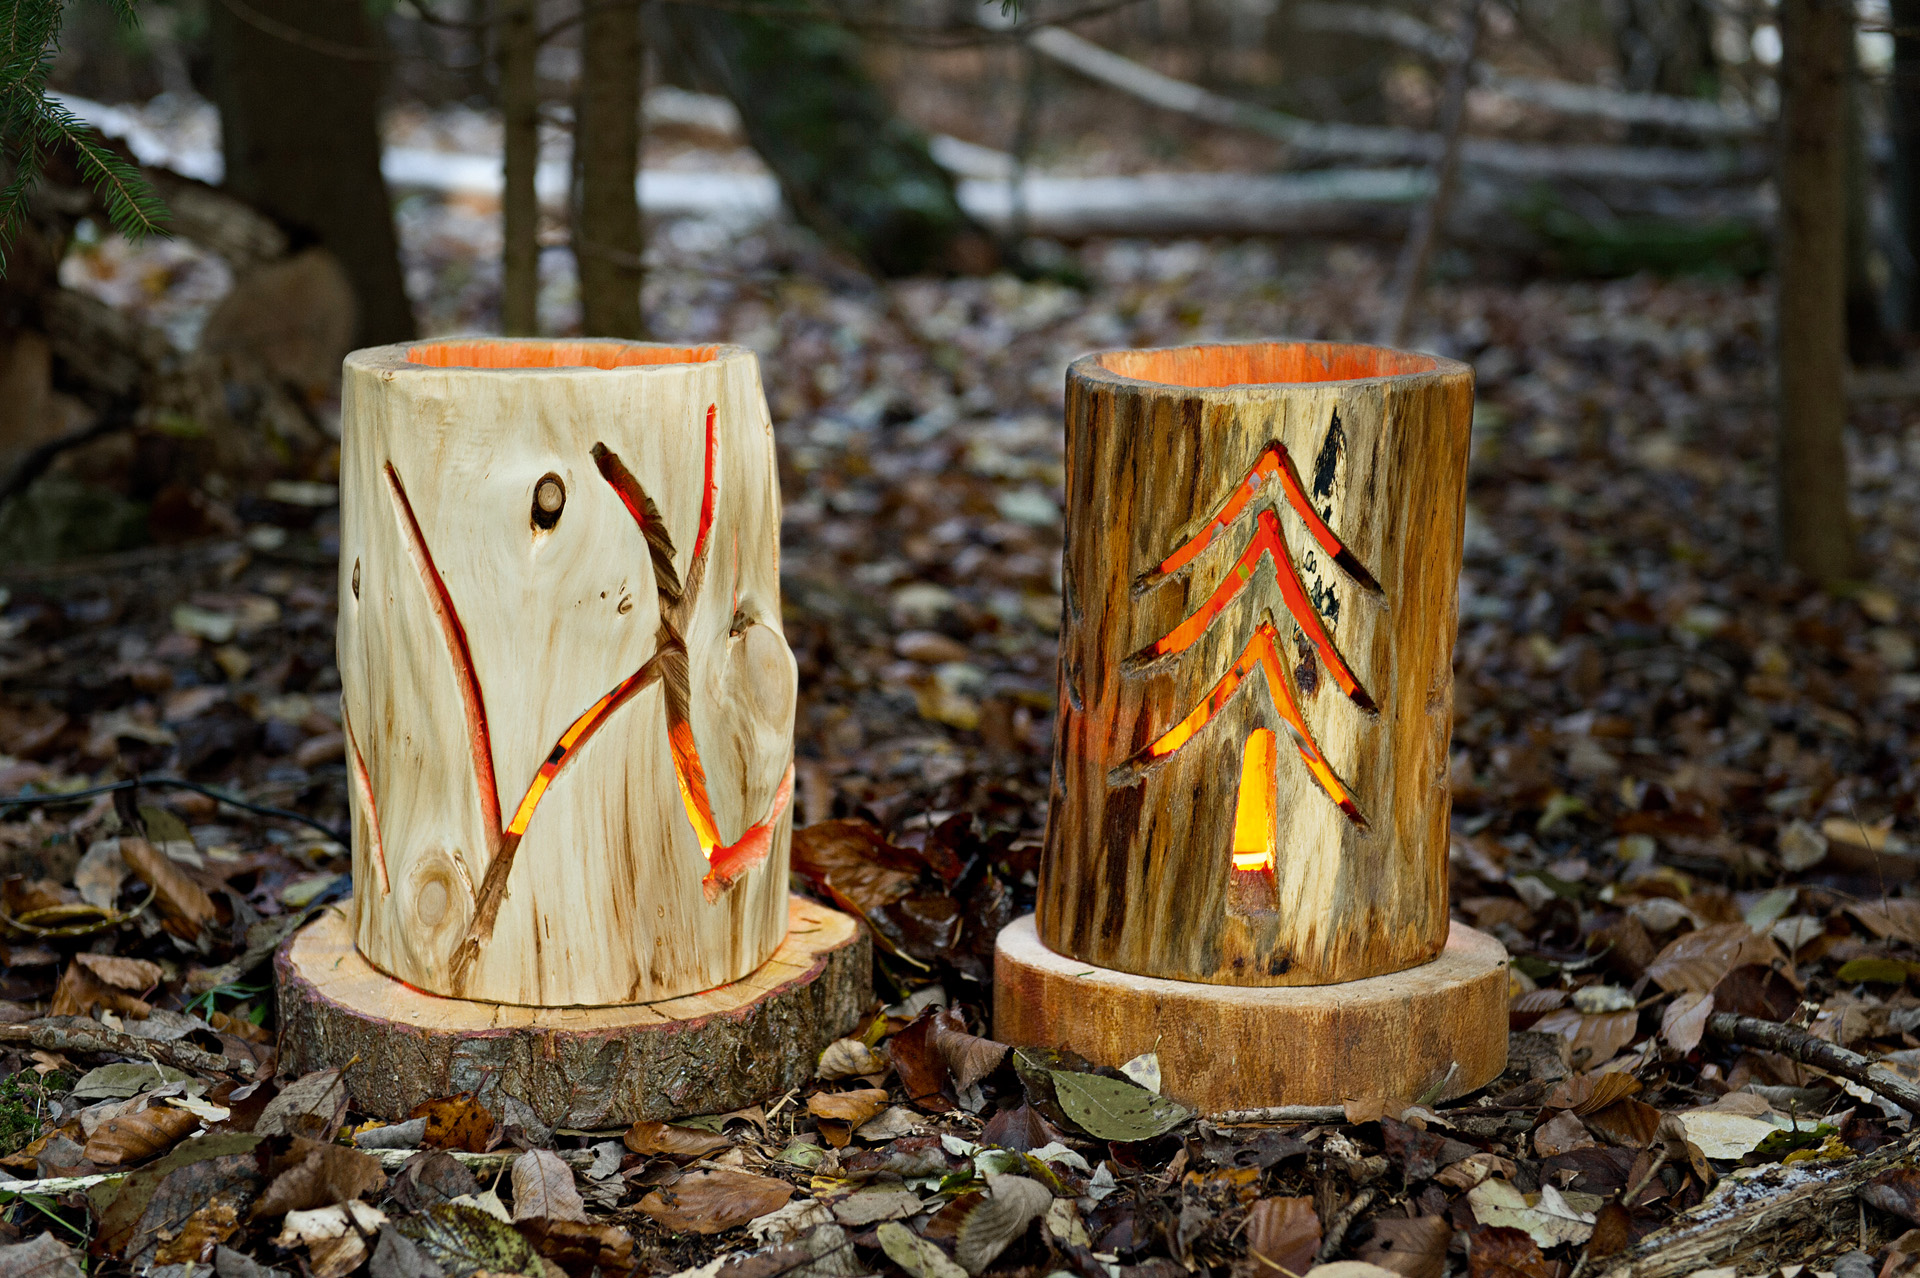 Two DIY log lanterns with patterns cut into the side and lights inside